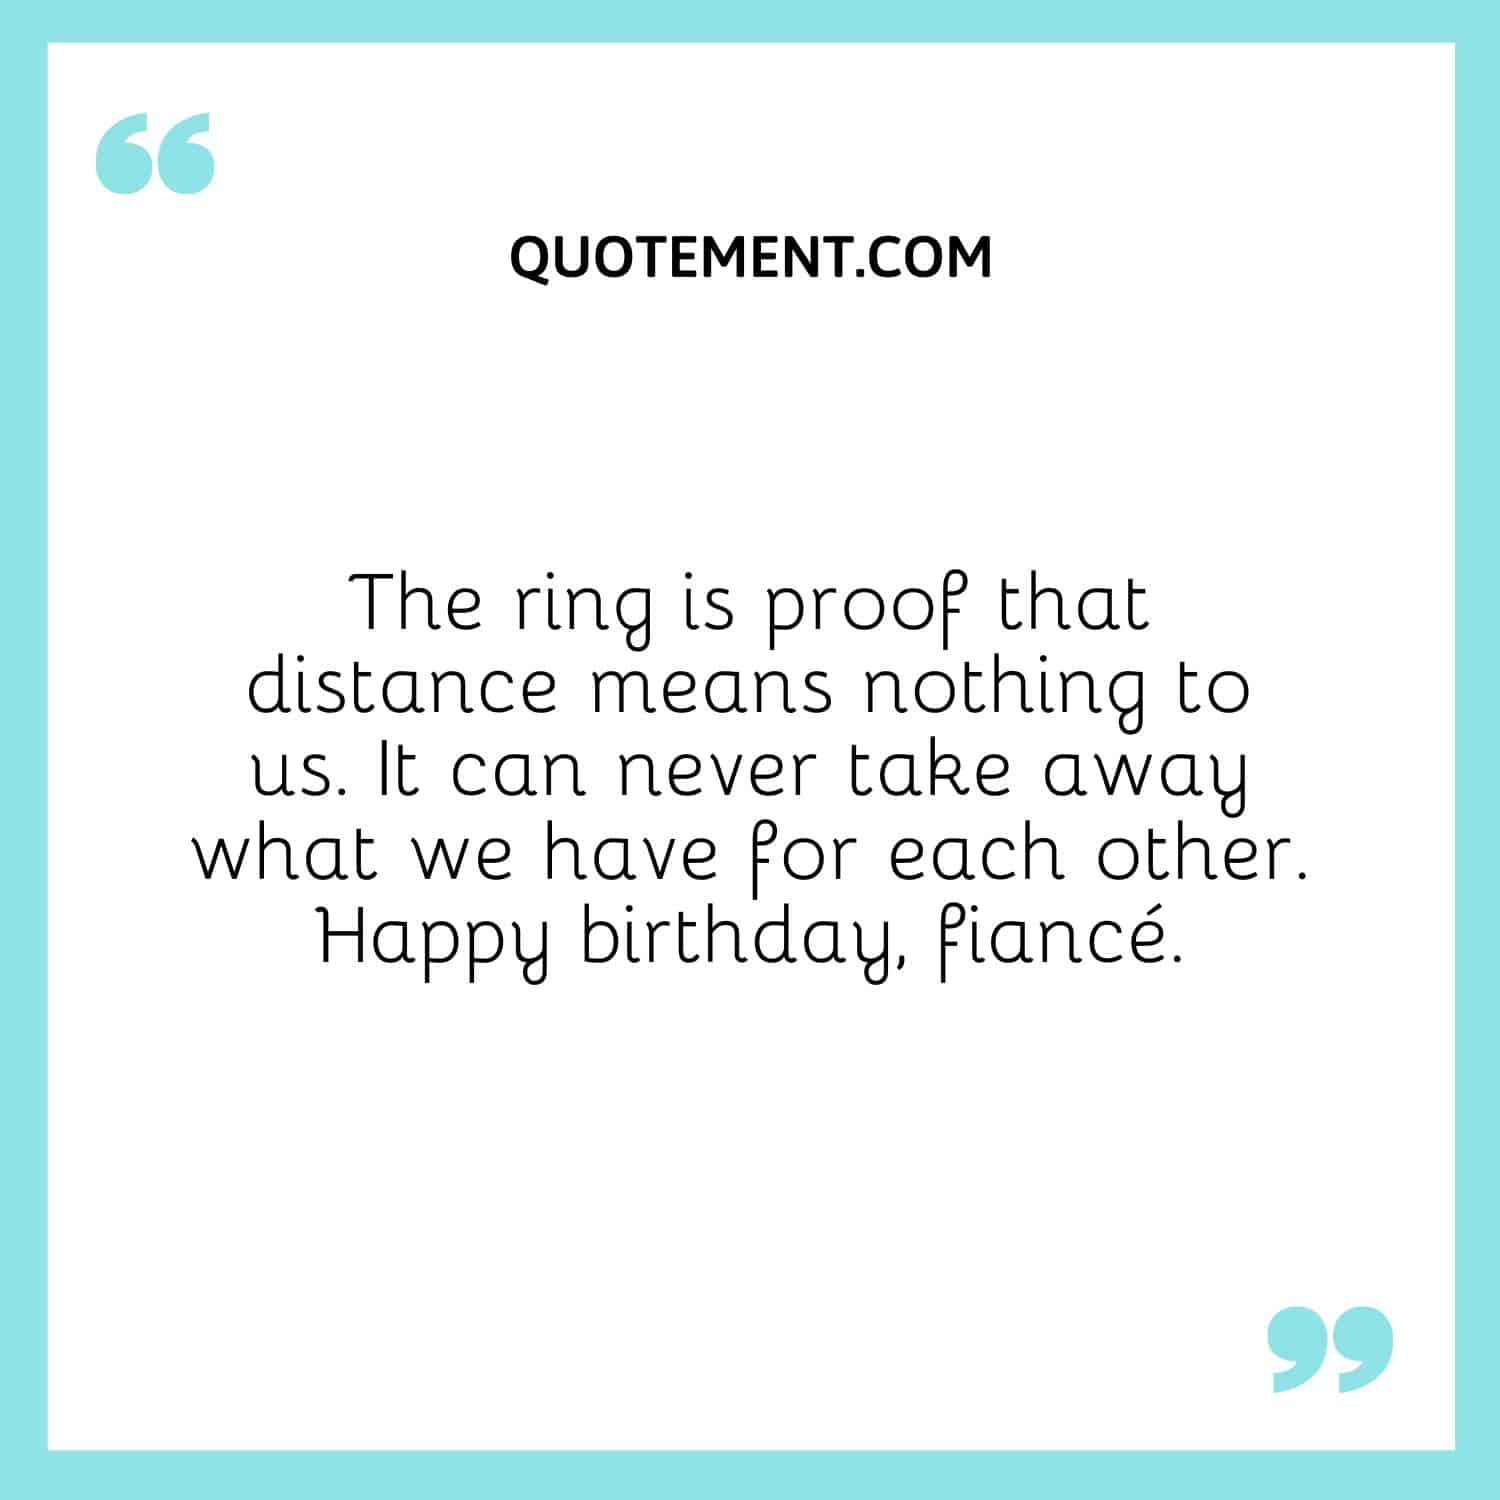 The ring is proof that distance means nothing to us